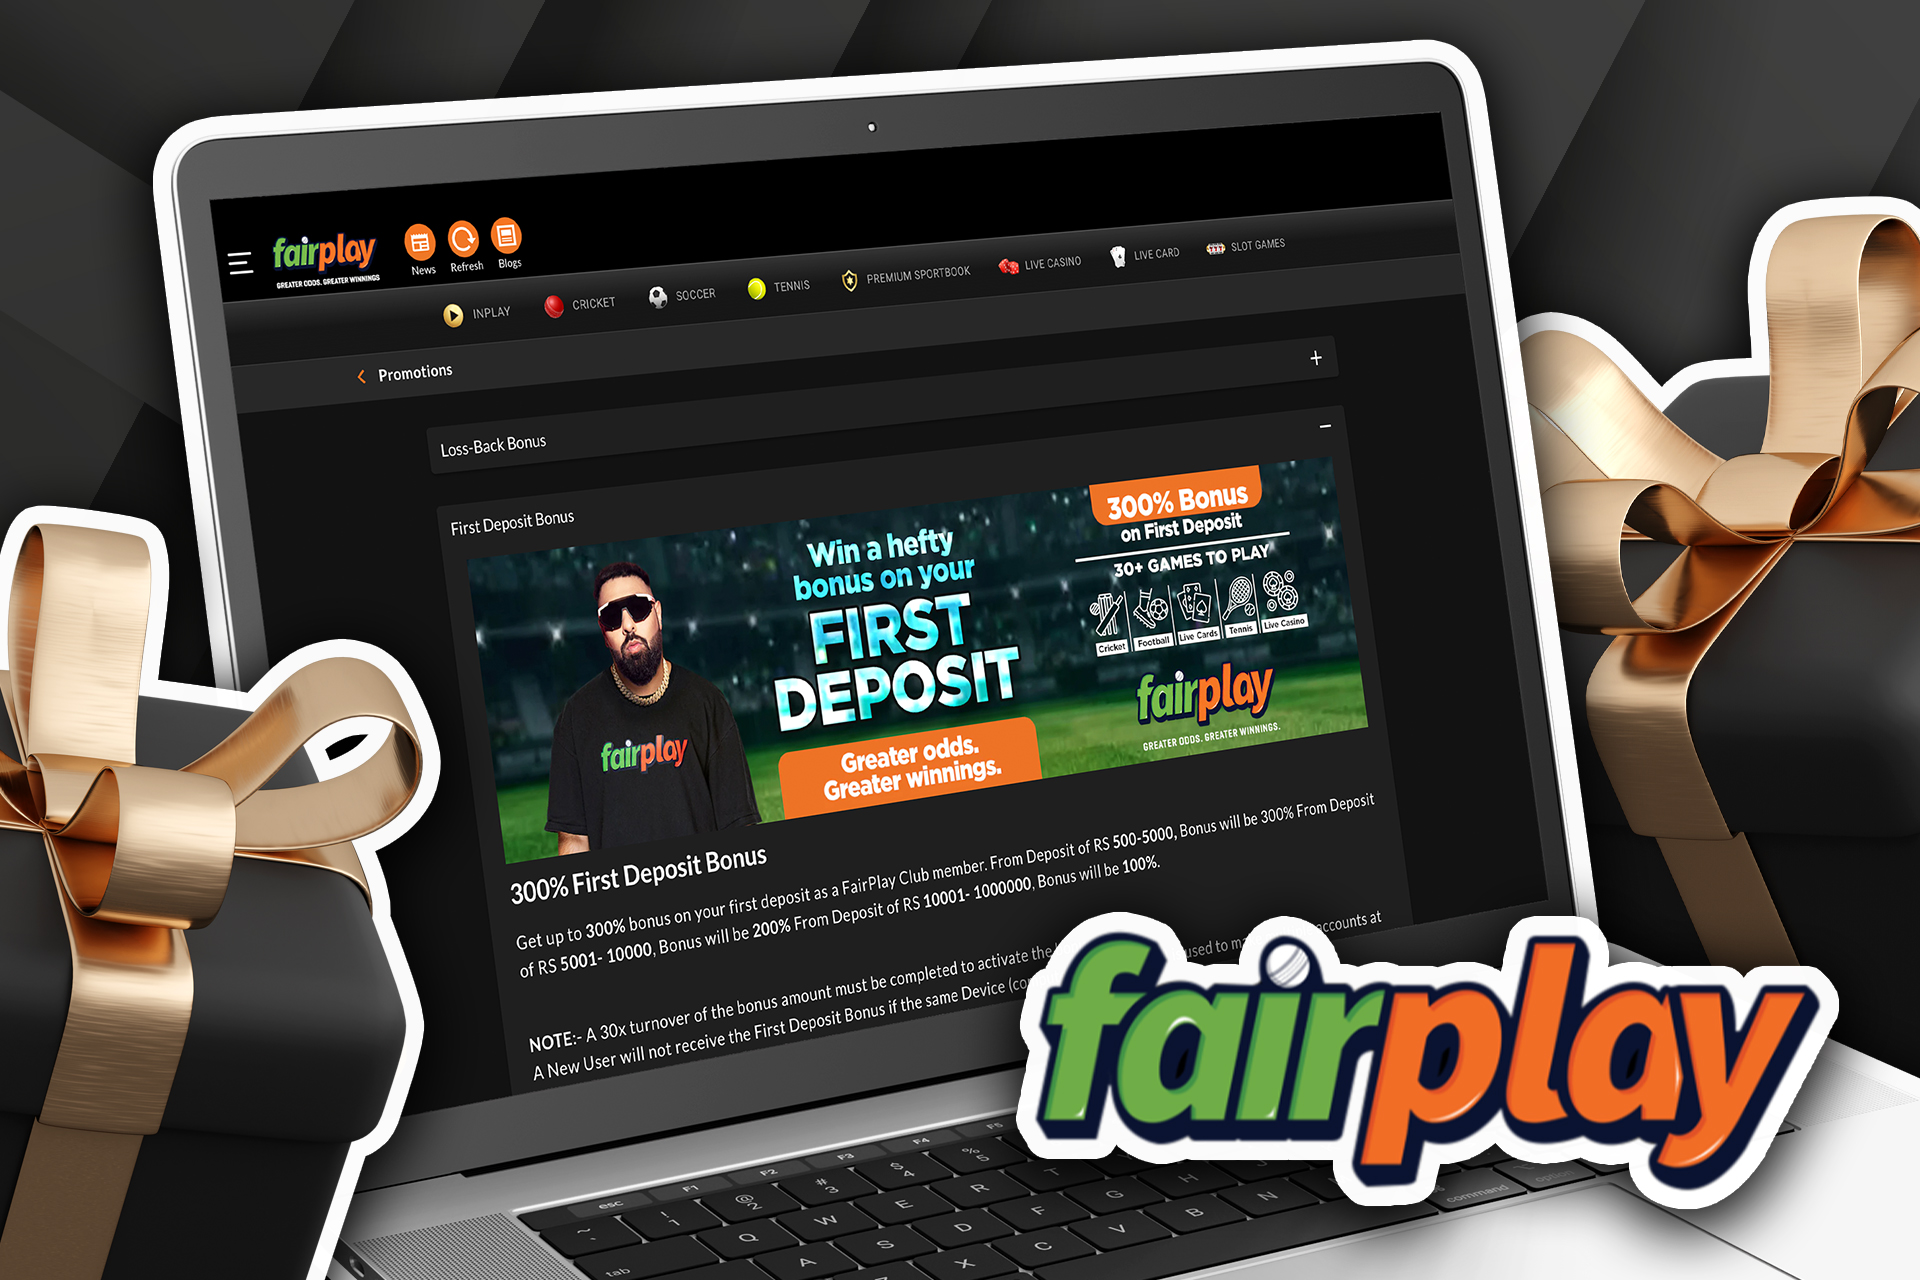 Get the welcome bonus from Fairplay of up to 300%.